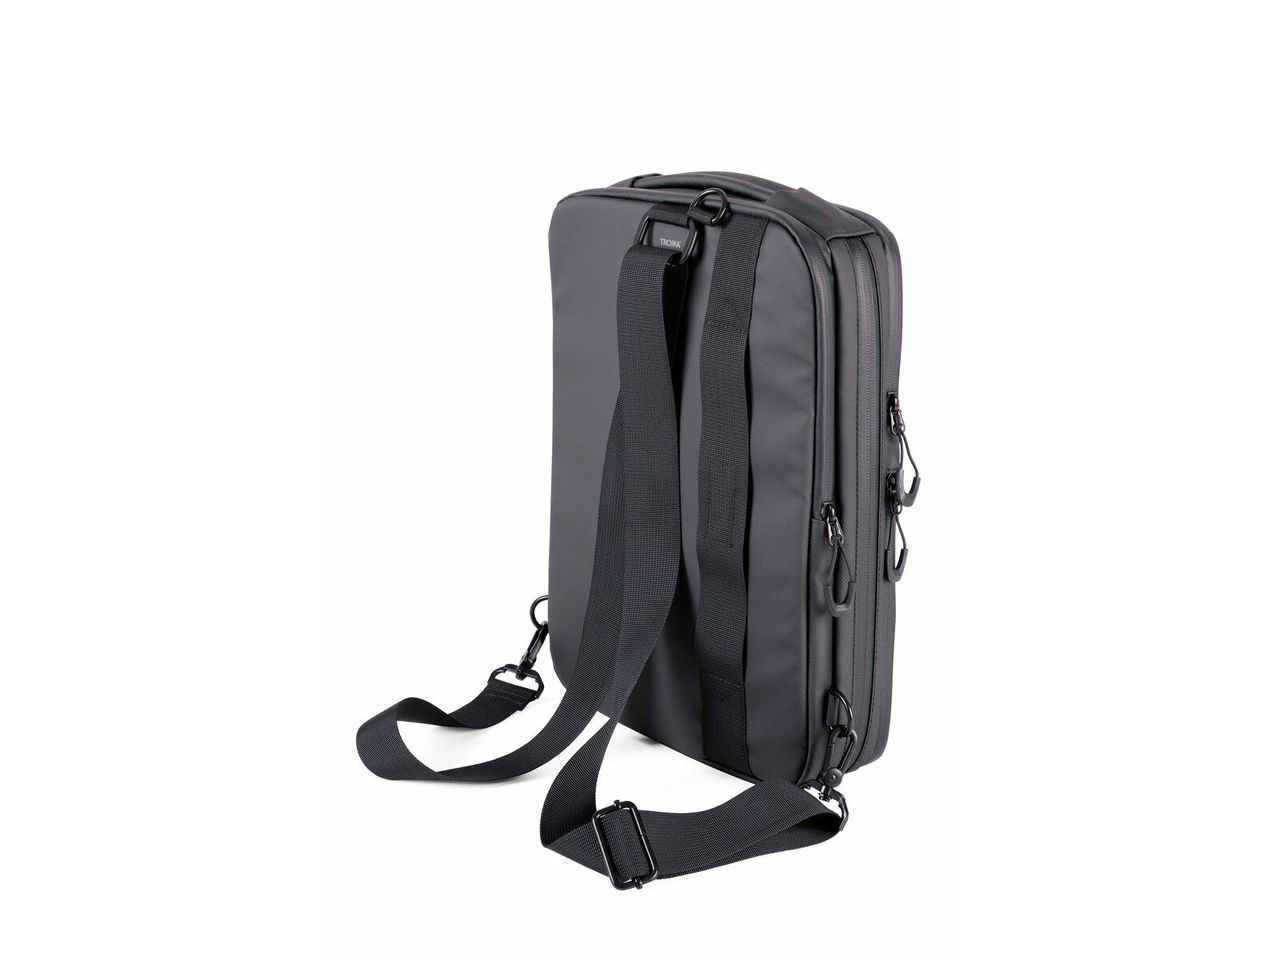 Borsa a tracolla per laptop/tablet Bag to Business